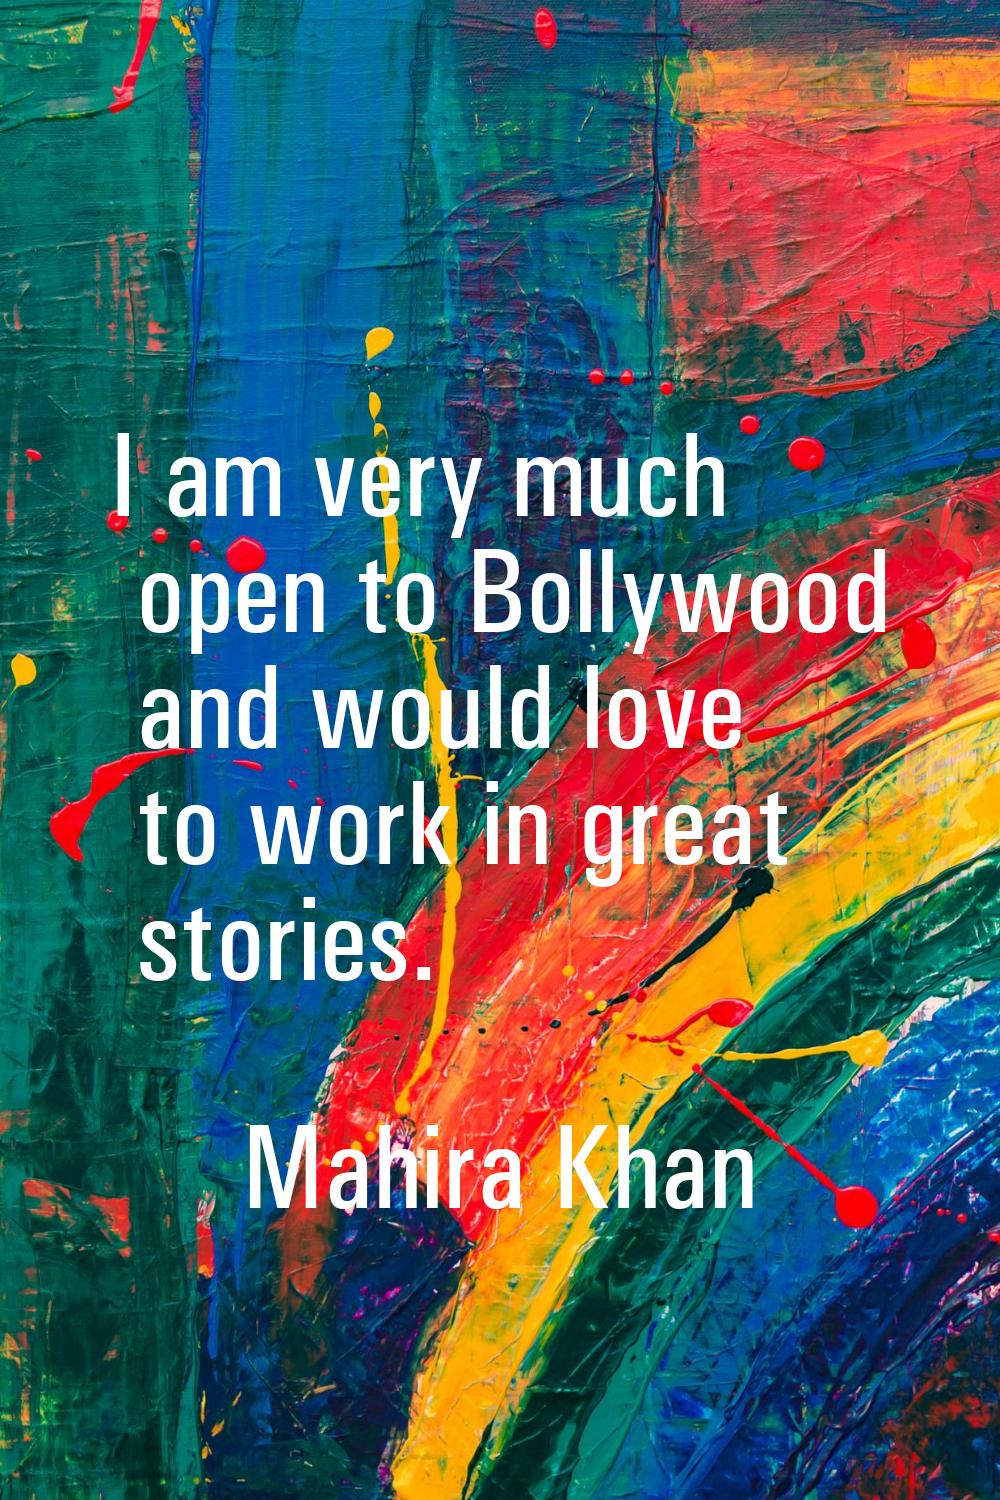 I am very much open to Bollywood and would love to work in great stories.